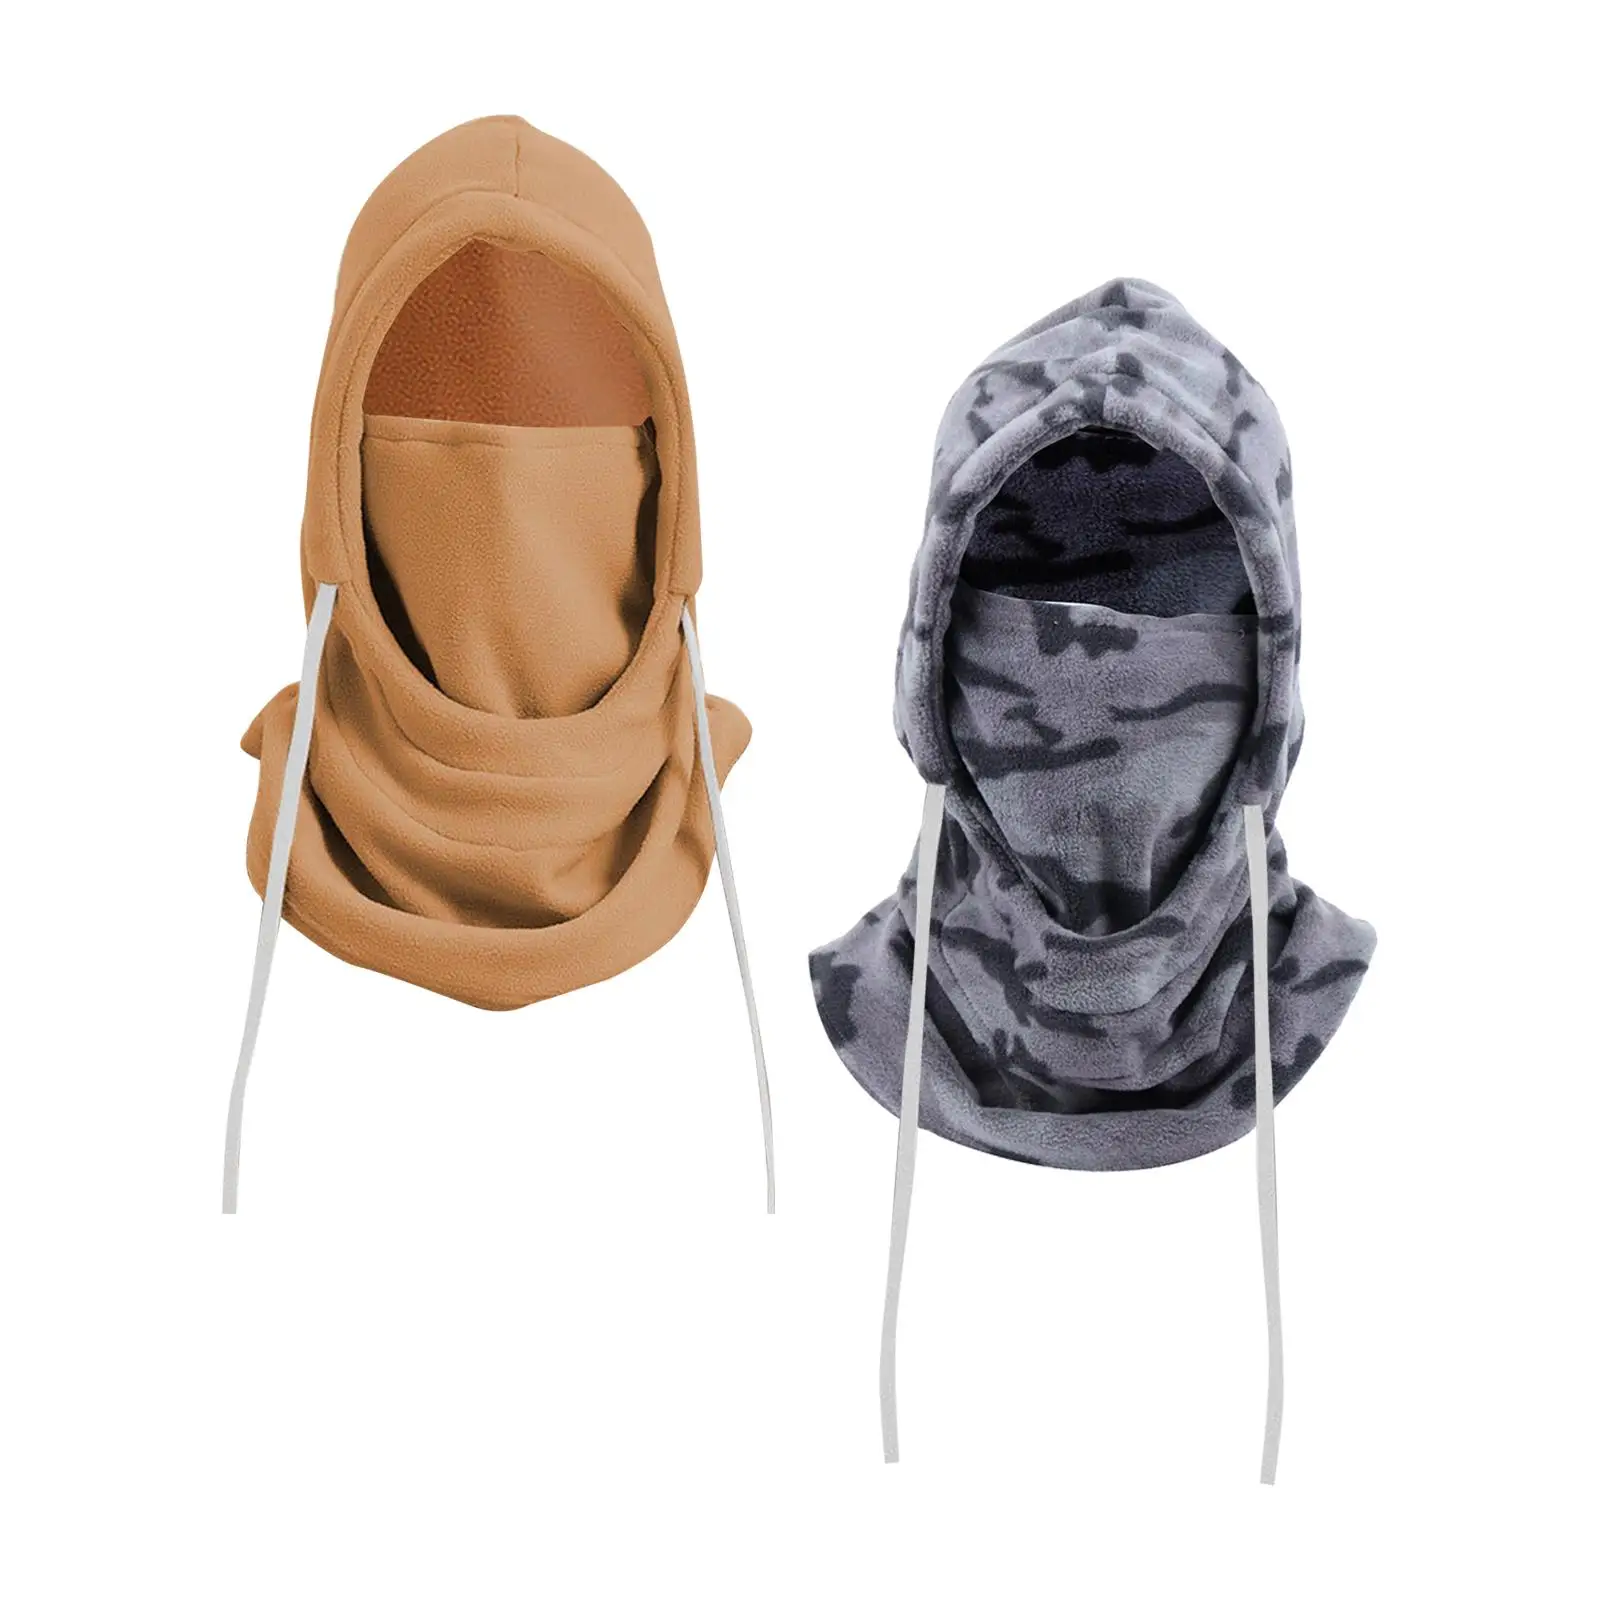 Balaclava  Neck Warmer for Outdoor Ski Sport with Elastic Cord Comfortable Durable Multiple wearing Ways